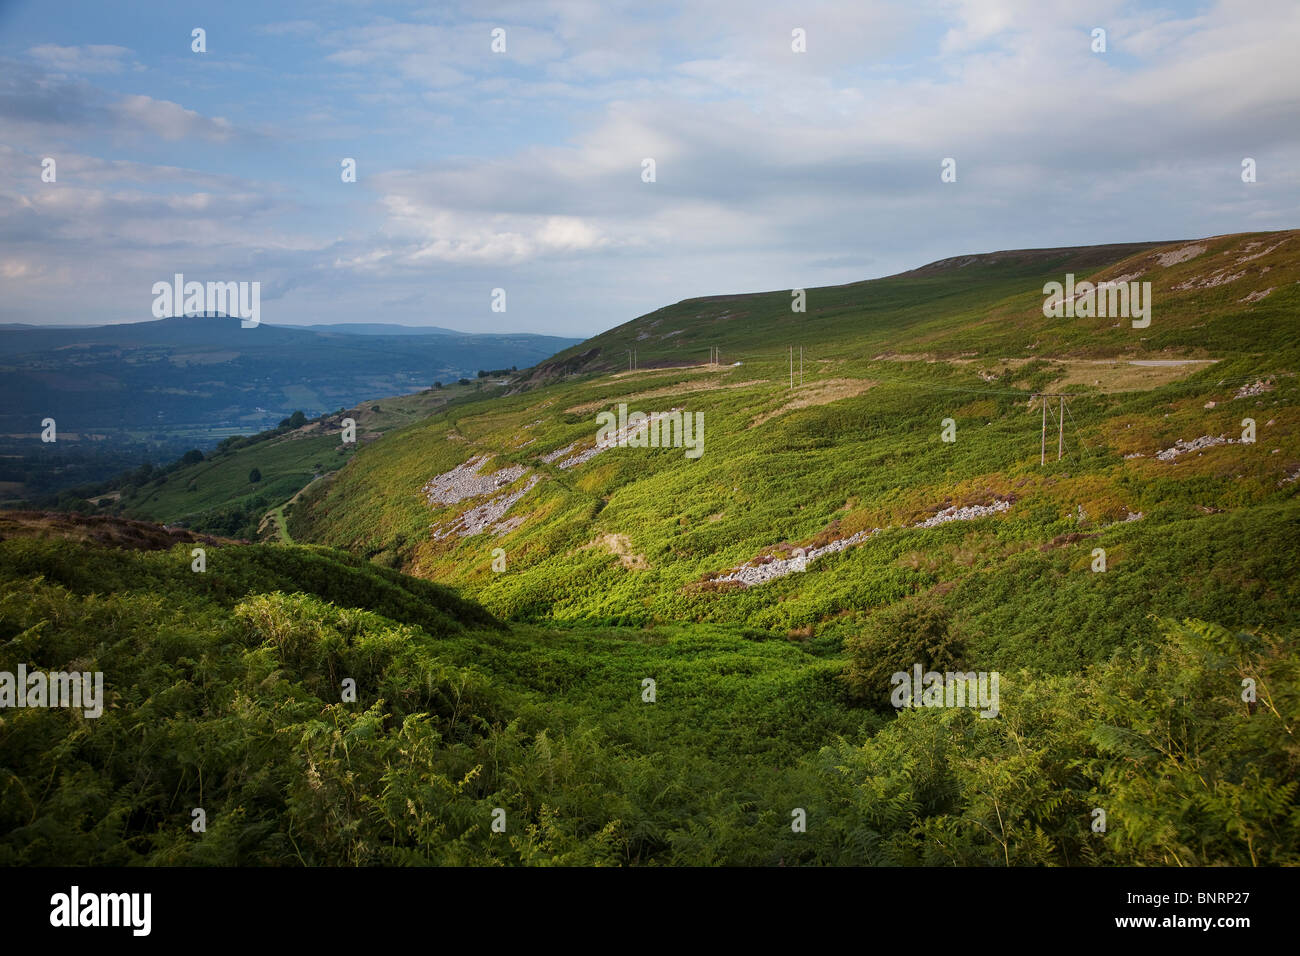 The Tumble hillside looking towards the Sugar Loaf Mountain Wales UK Stock Photo